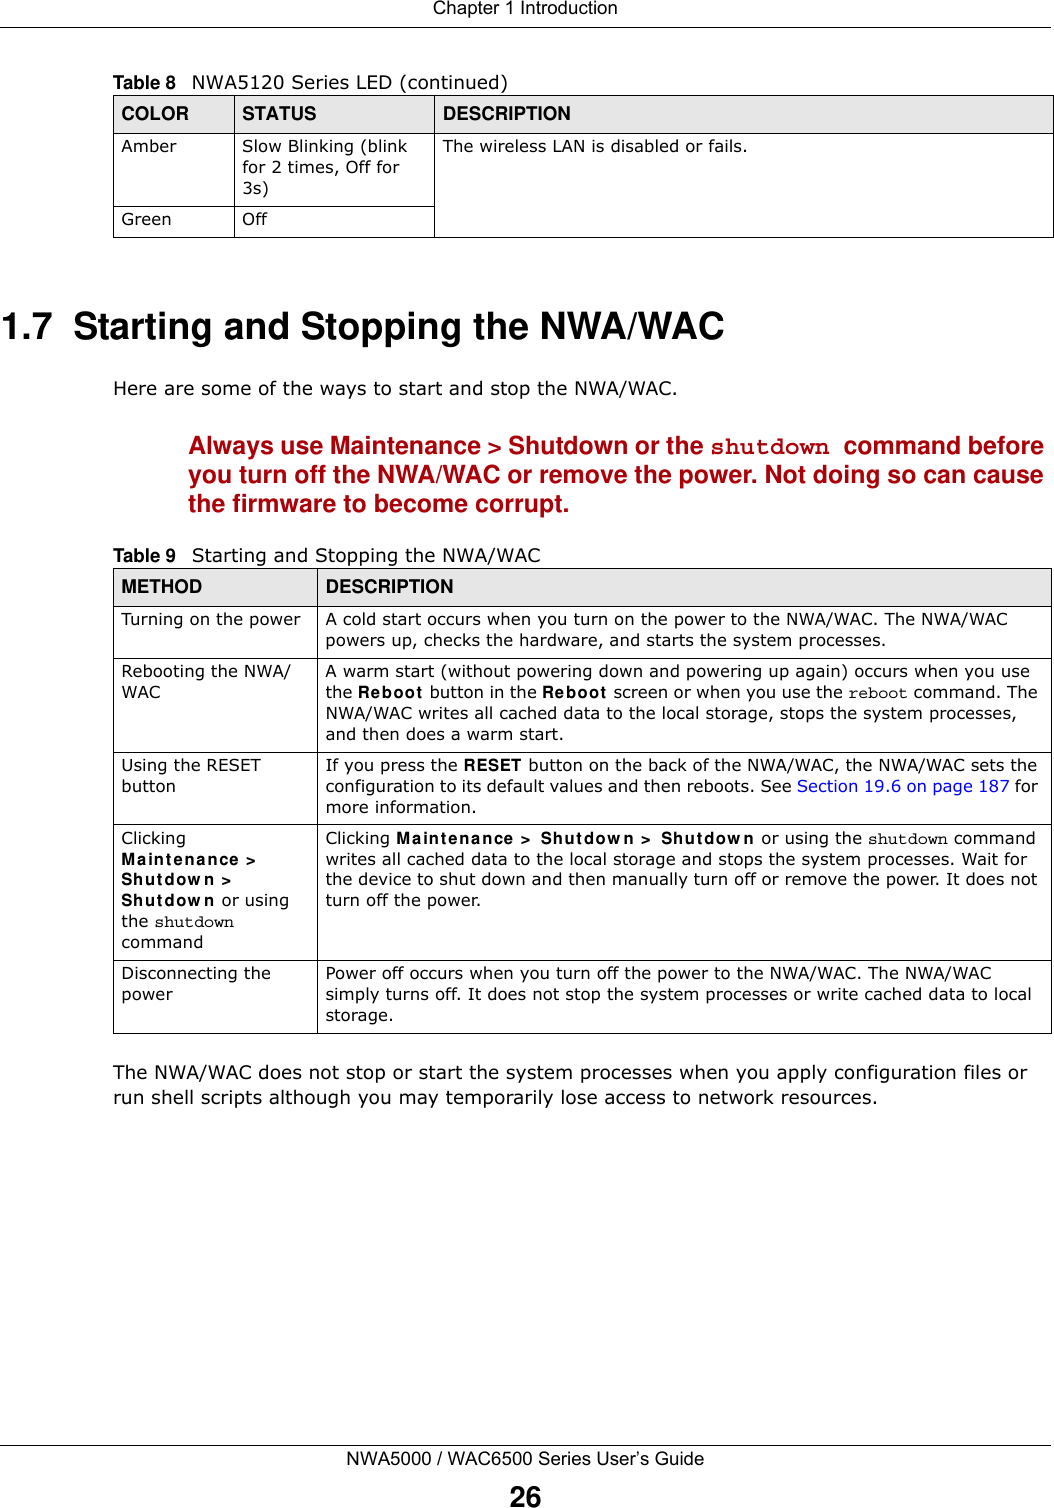 Chapter 1 IntroductionNWA5000 / WAC6500 Series User’s Guide261.7  Starting and Stopping the NWA/WACHere are some of the ways to start and stop the NWA/WAC.Always use Maintenance &gt; Shutdown or the shutdown command before you turn off the NWA/WAC or remove the power. Not doing so can cause the firmware to become corrupt. The NWA/WAC does not stop or start the system processes when you apply configuration files or run shell scripts although you may temporarily lose access to network resources.Amber Slow Blinking (blink for 2 times, Off for 3s)The wireless LAN is disabled or fails.Green OffTable 8   NWA5120 Series LED (continued)COLOR STATUS DESCRIPTIONTable 9   Starting and Stopping the NWA/WACMETHOD DESCRIPTIONTurning on the power A cold start occurs when you turn on the power to the NWA/WAC. The NWA/WAC powers up, checks the hardware, and starts the system processes.Rebooting the NWA/WACA warm start (without powering down and powering up again) occurs when you use the Reboot  button in the Re bo ot  screen or when you use the reboot command. The NWA/WAC writes all cached data to the local storage, stops the system processes, and then does a warm start. Using the RESET buttonIf you press the RESET button on the back of the NWA/WAC, the NWA/WAC sets the configuration to its default values and then reboots. See Section 19.6 on page 187 for more information.Clicking Main t enance &gt;  Shutdow n &gt;  Sh ut do w n  or using the shutdown commandClicking M a intenance  &gt;  Shut dow n  &gt;  Shutdow n or using the shutdown command writes all cached data to the local storage and stops the system processes. Wait for the device to shut down and then manually turn off or remove the power. It does not turn off the power. Disconnecting the powerPower off occurs when you turn off the power to the NWA/WAC. The NWA/WAC simply turns off. It does not stop the system processes or write cached data to local storage. 